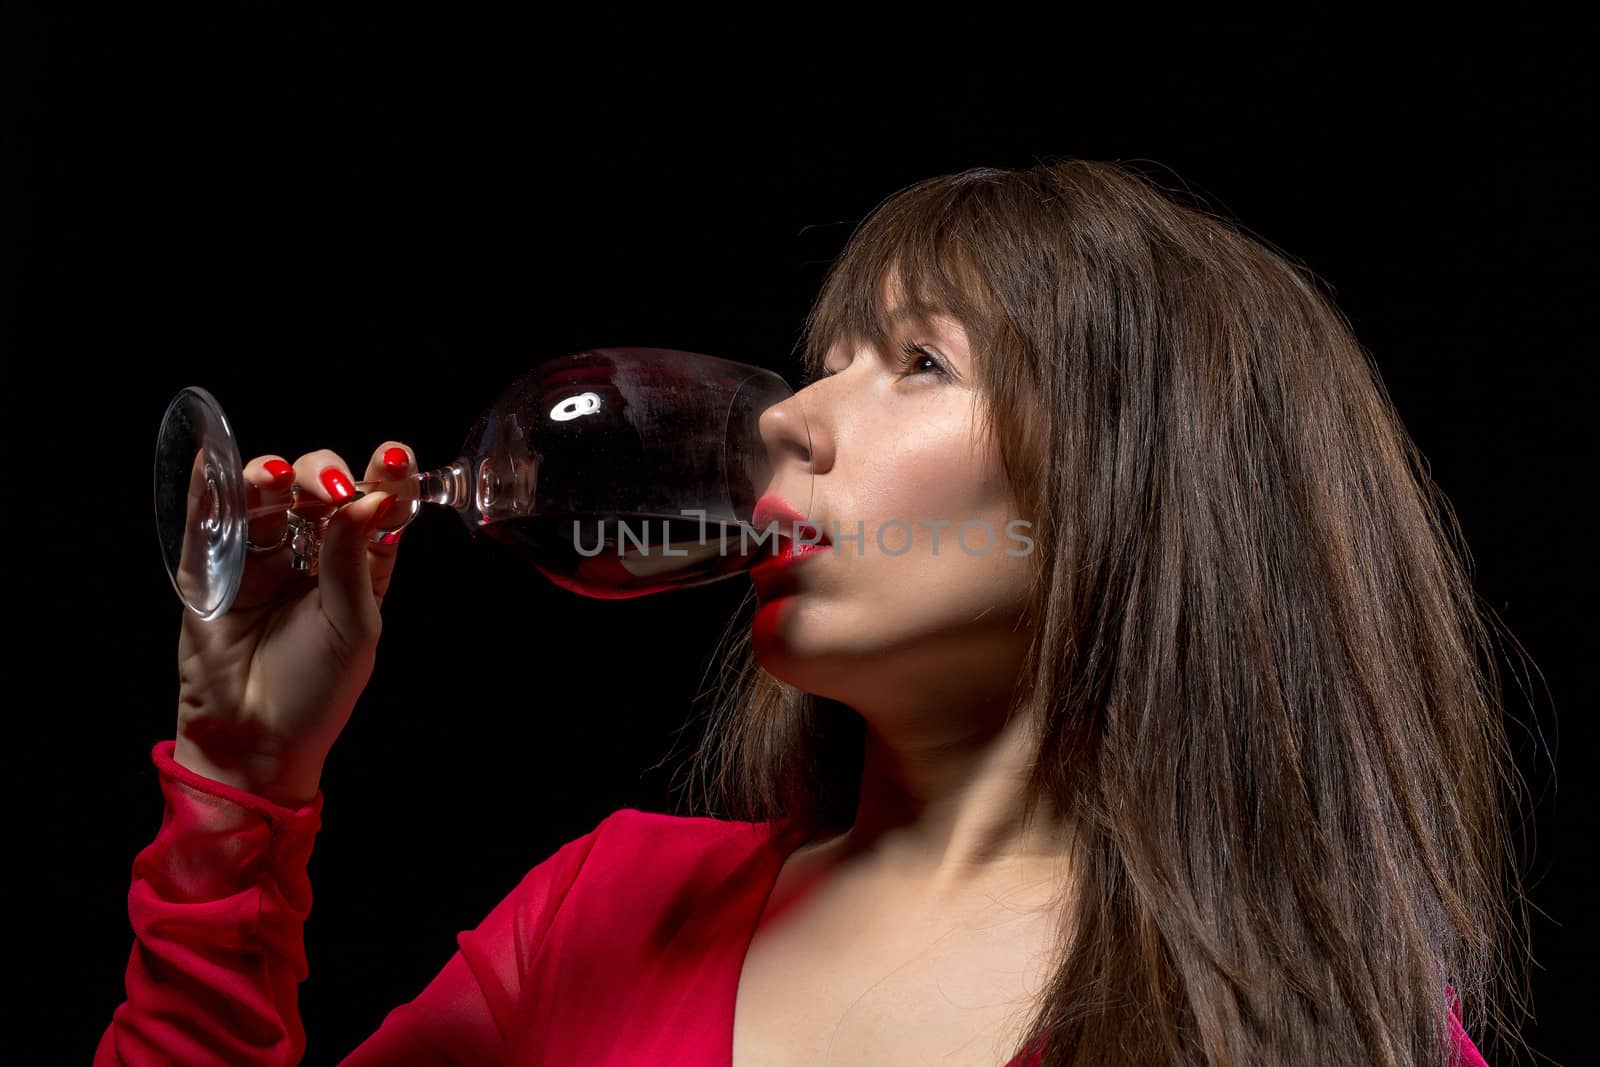 Young woman drinking red wine from a wineglass against a dark background